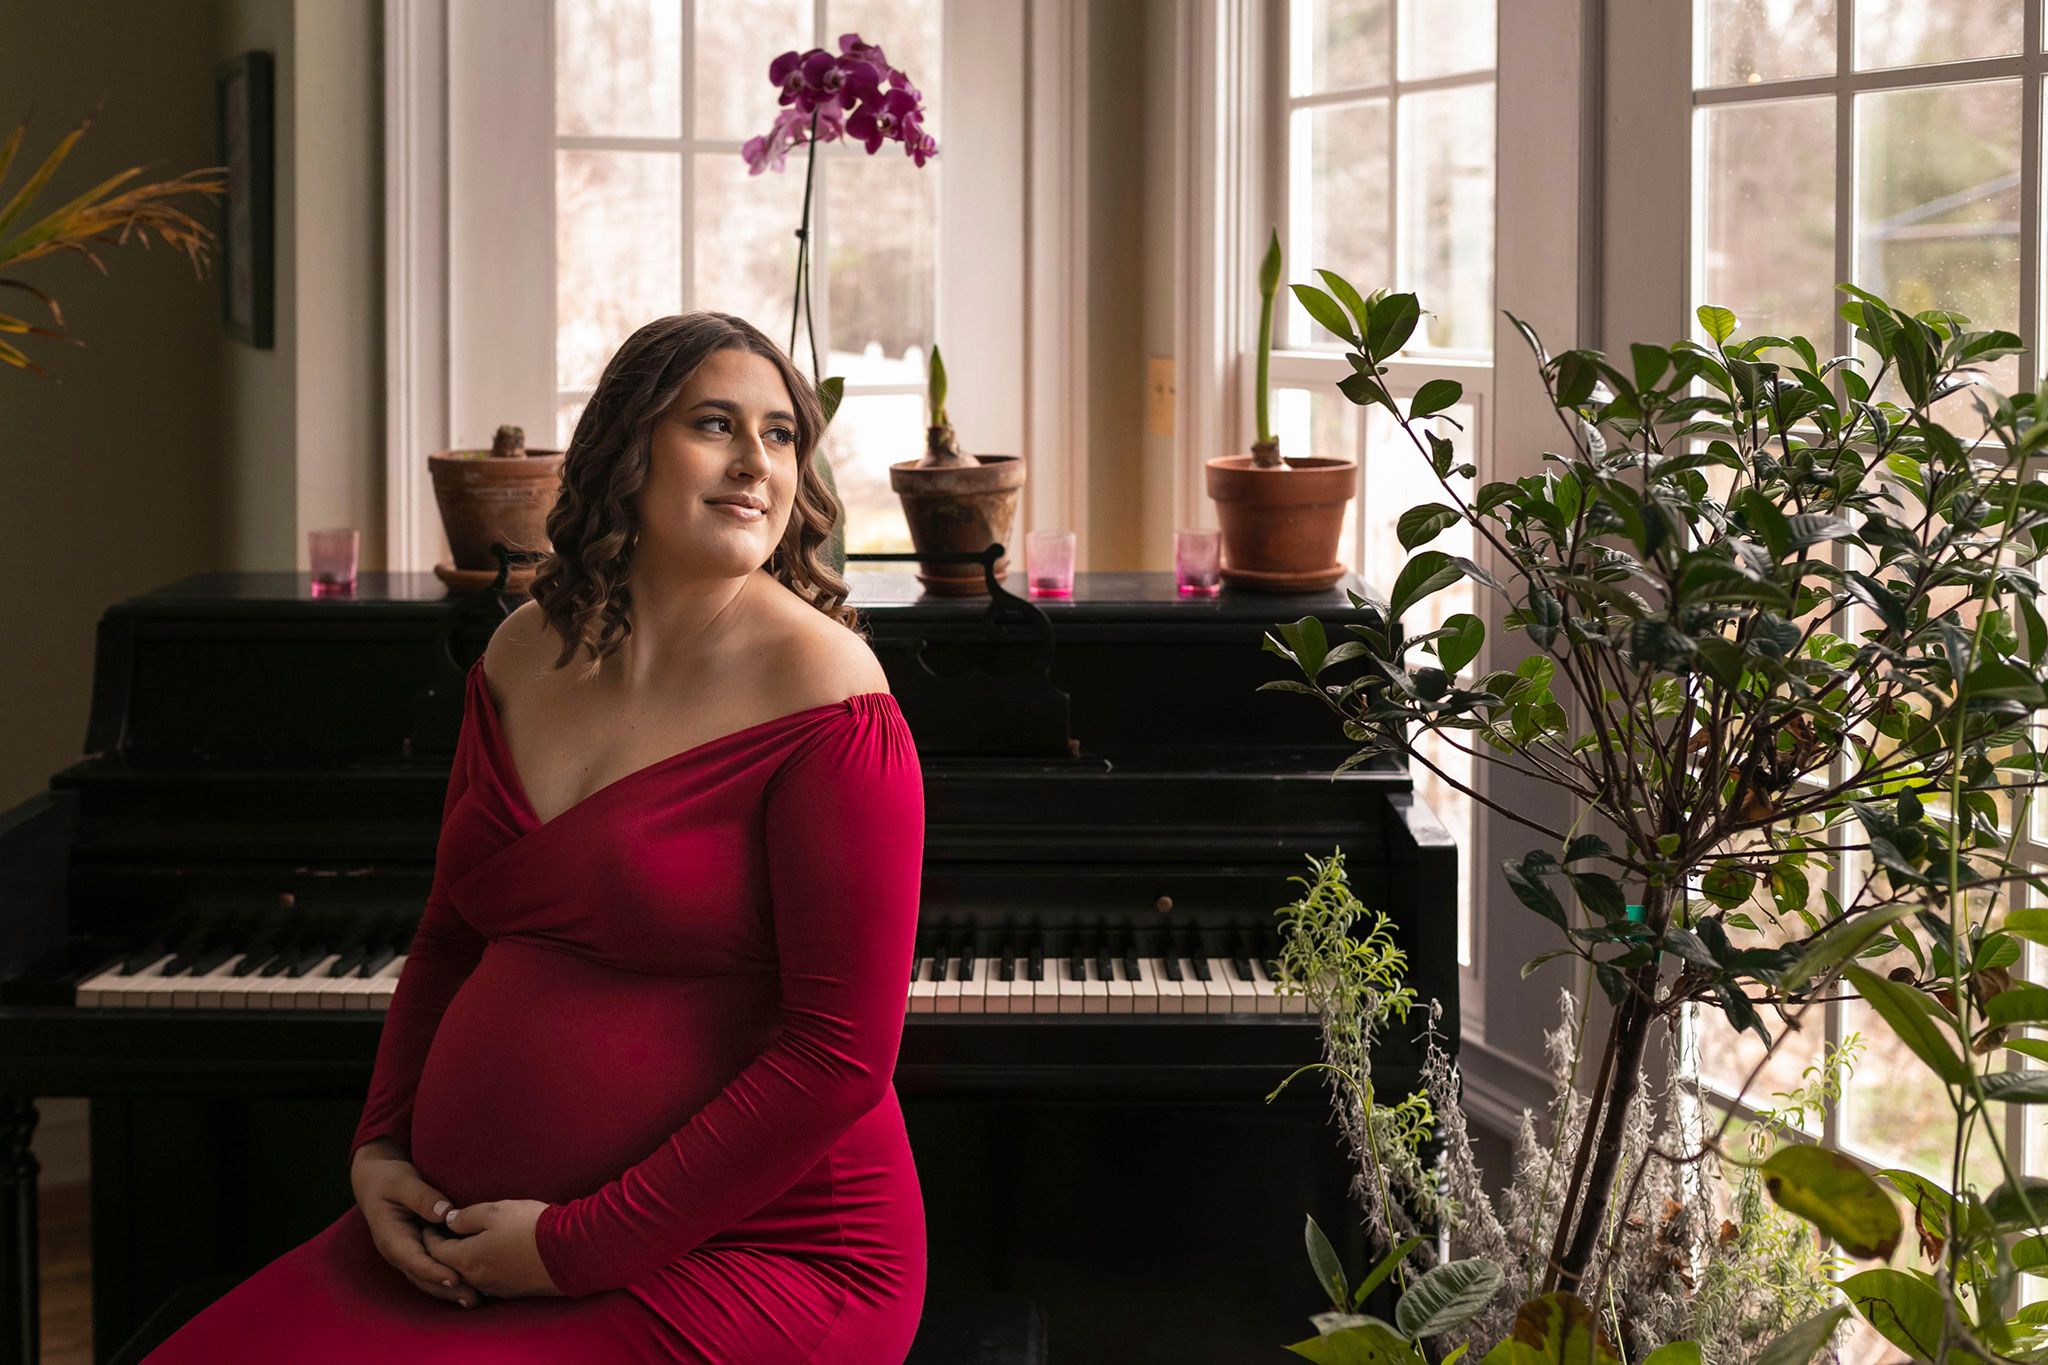 Expecting mom sits by piano and is surrounded by plants and flowers I Maternity Photoshoot NJ